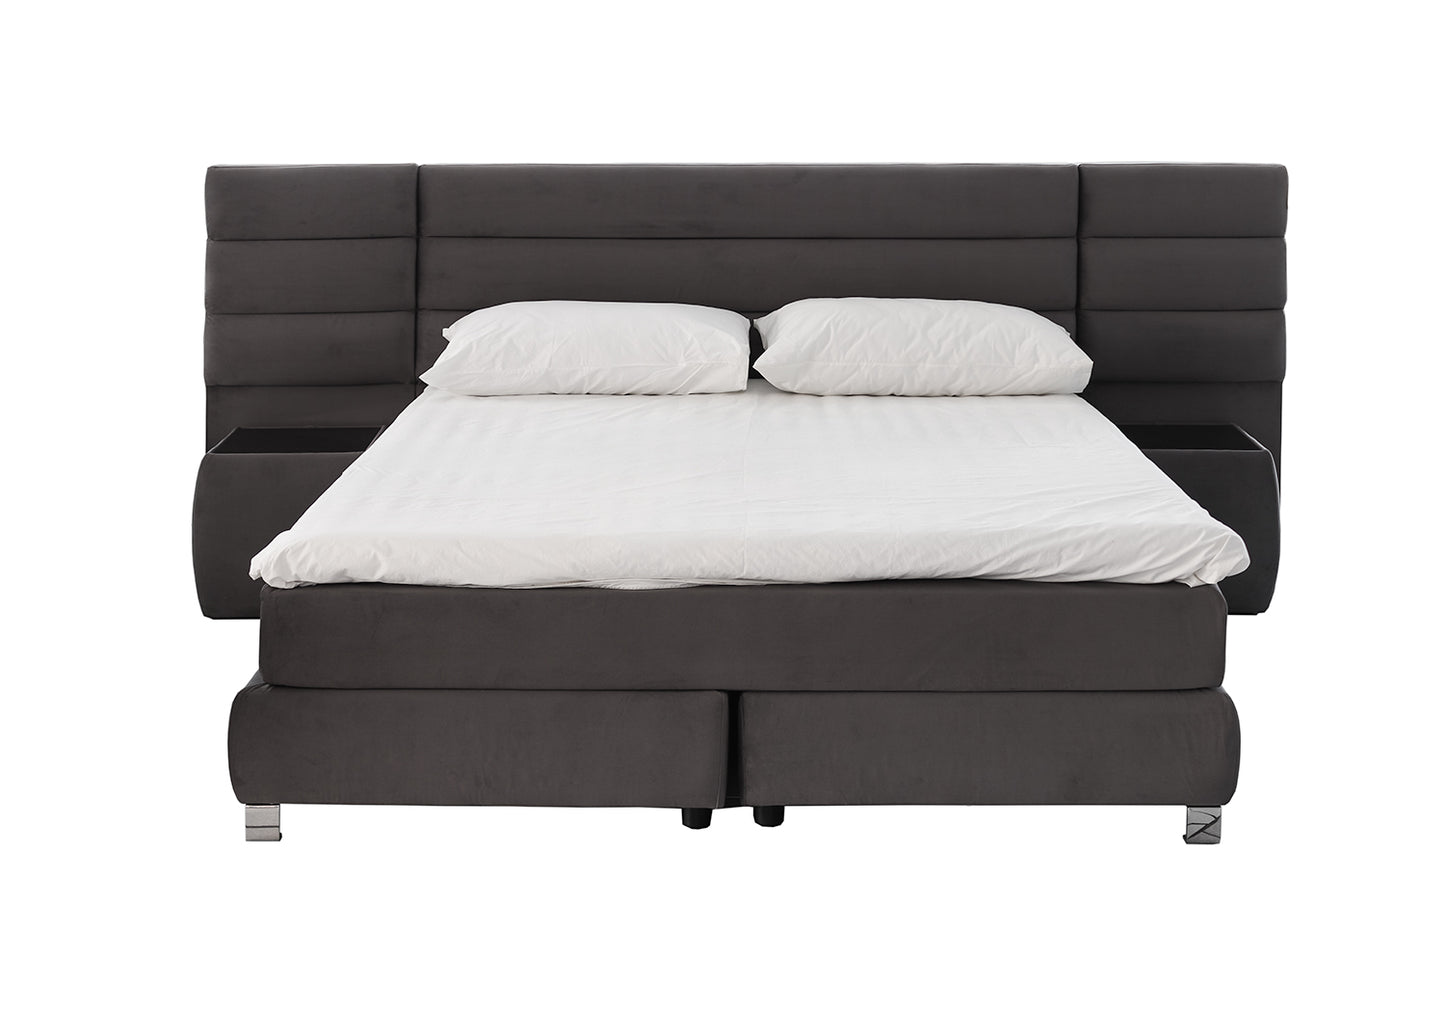 Jane King XL Bed & Pedestals & Triple-layer Mattress Included.